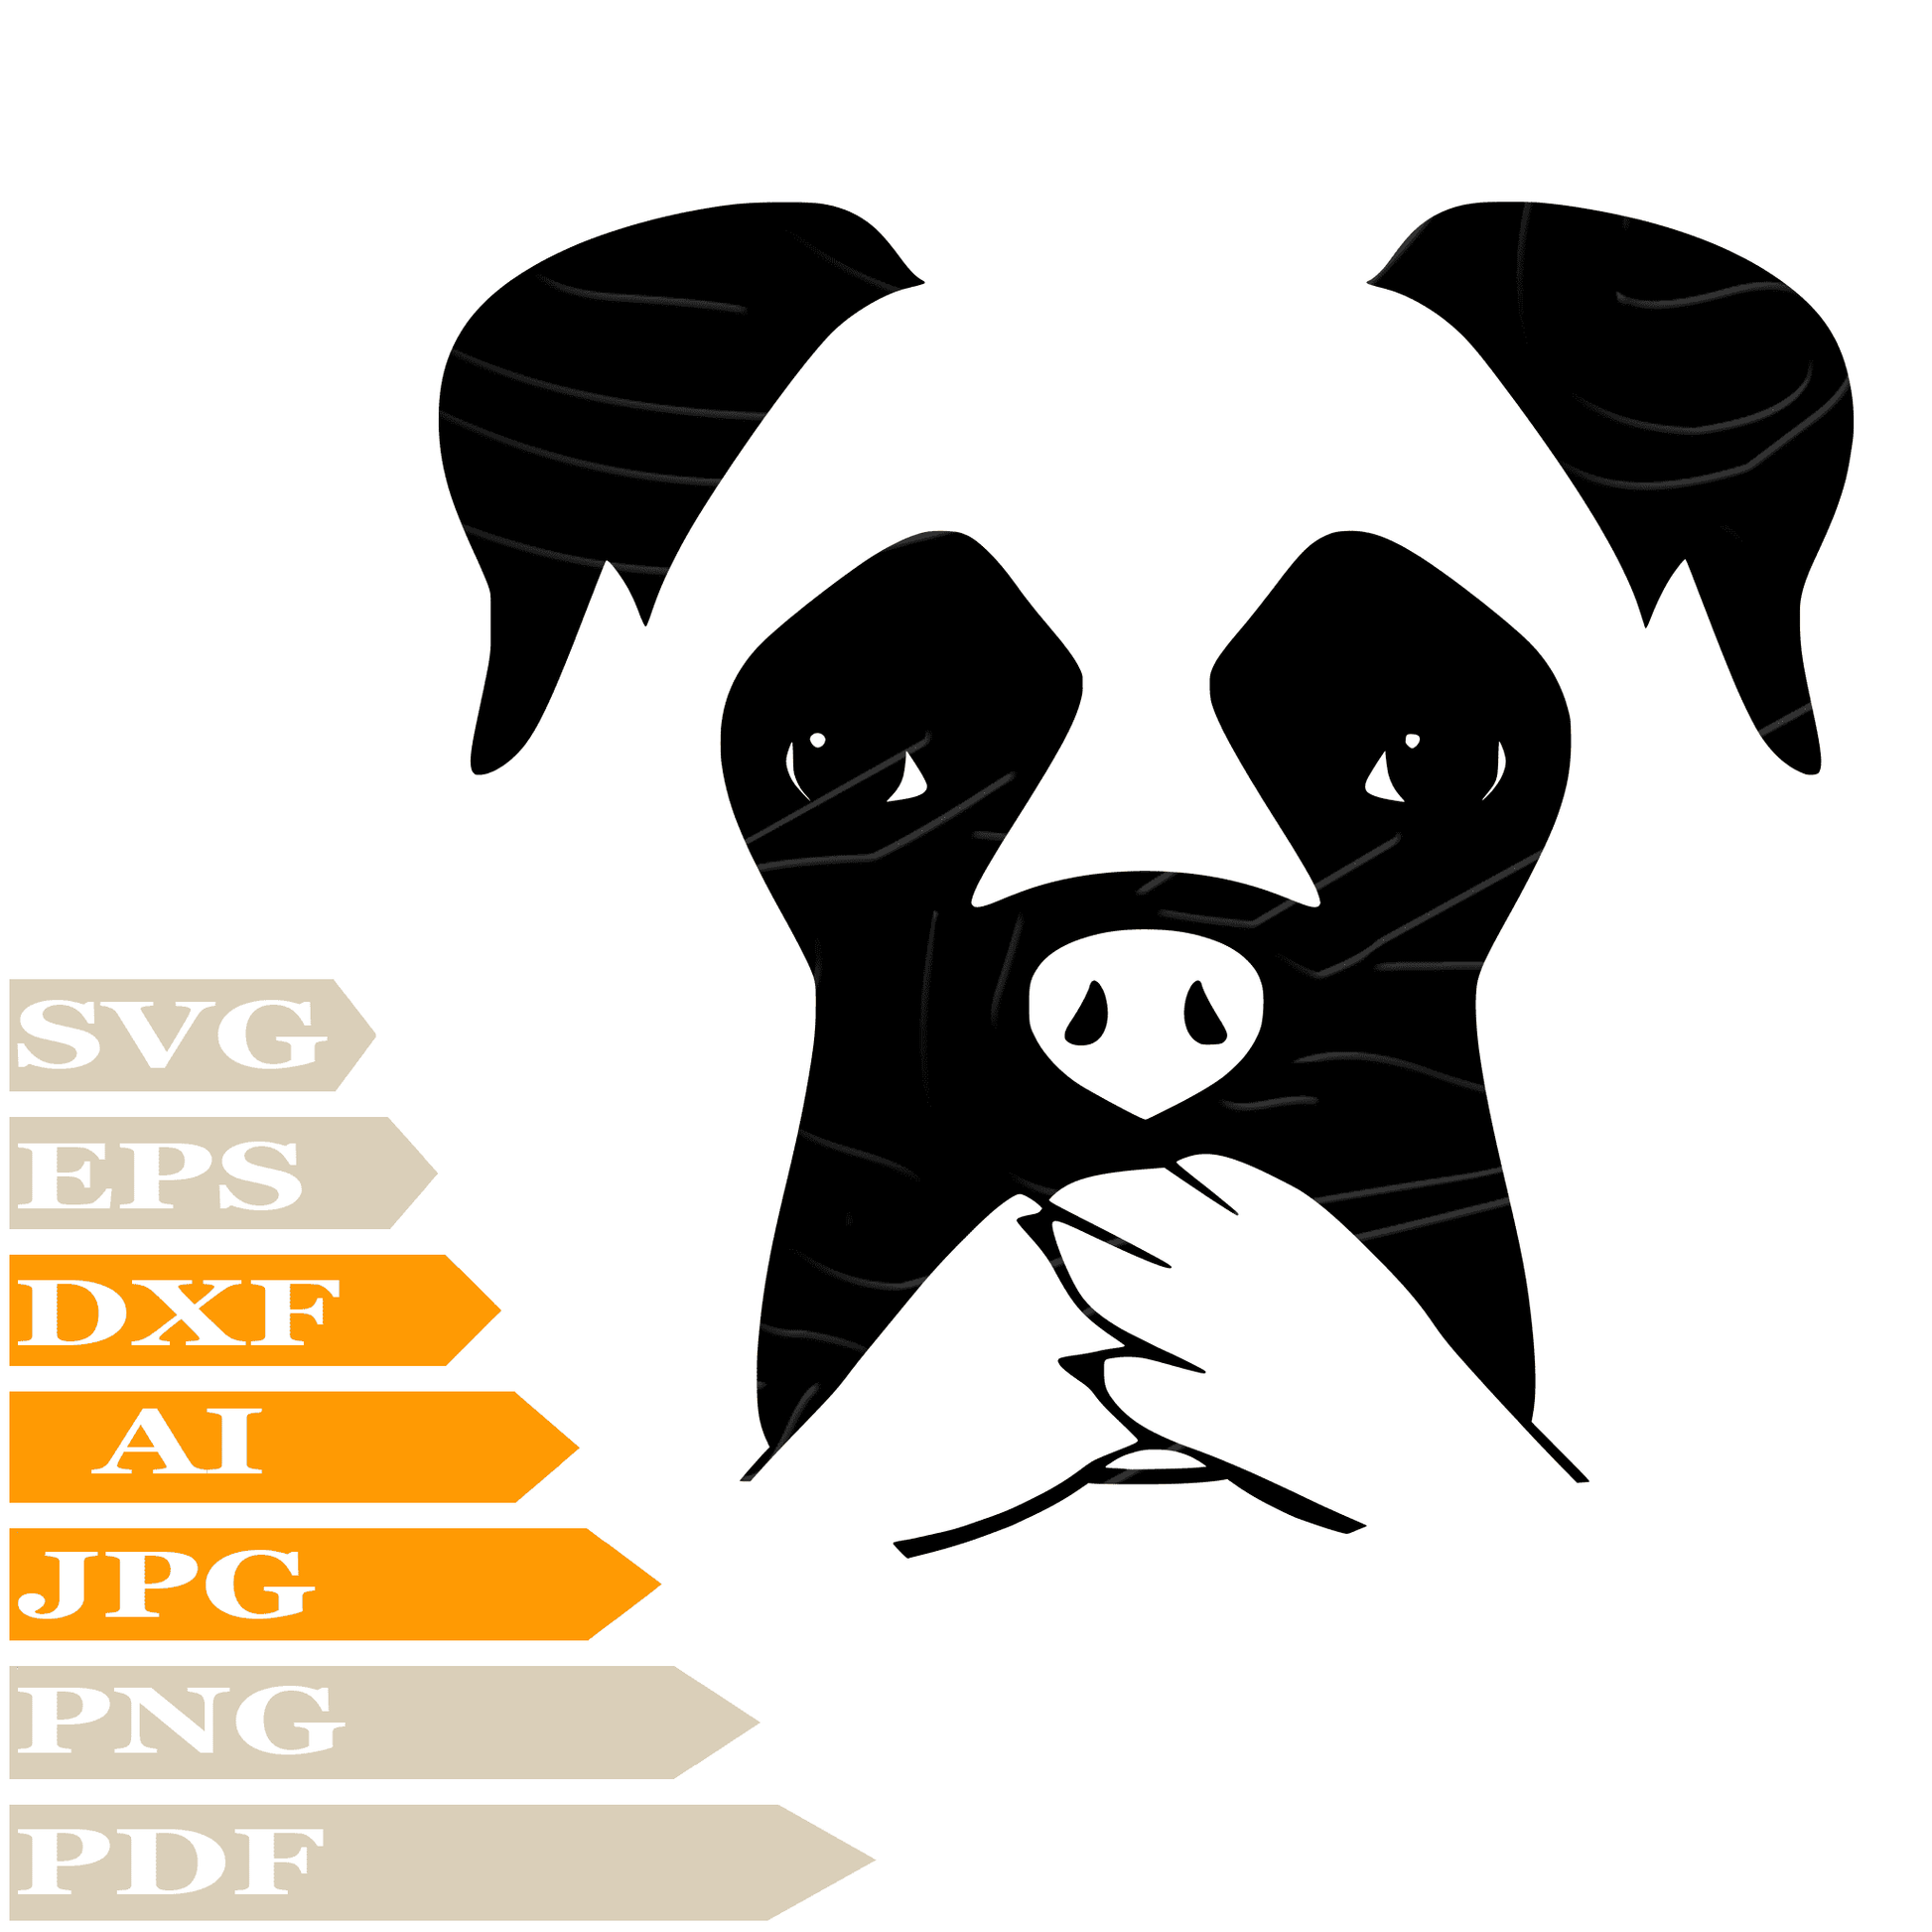 Boxer SVG File, Boxer Head Vector Graphics, Boxer Dog SVG For Cricut, Boxer Head PNG, Clipart, Cut File, Instant Download, For Tattoo, Silhouette